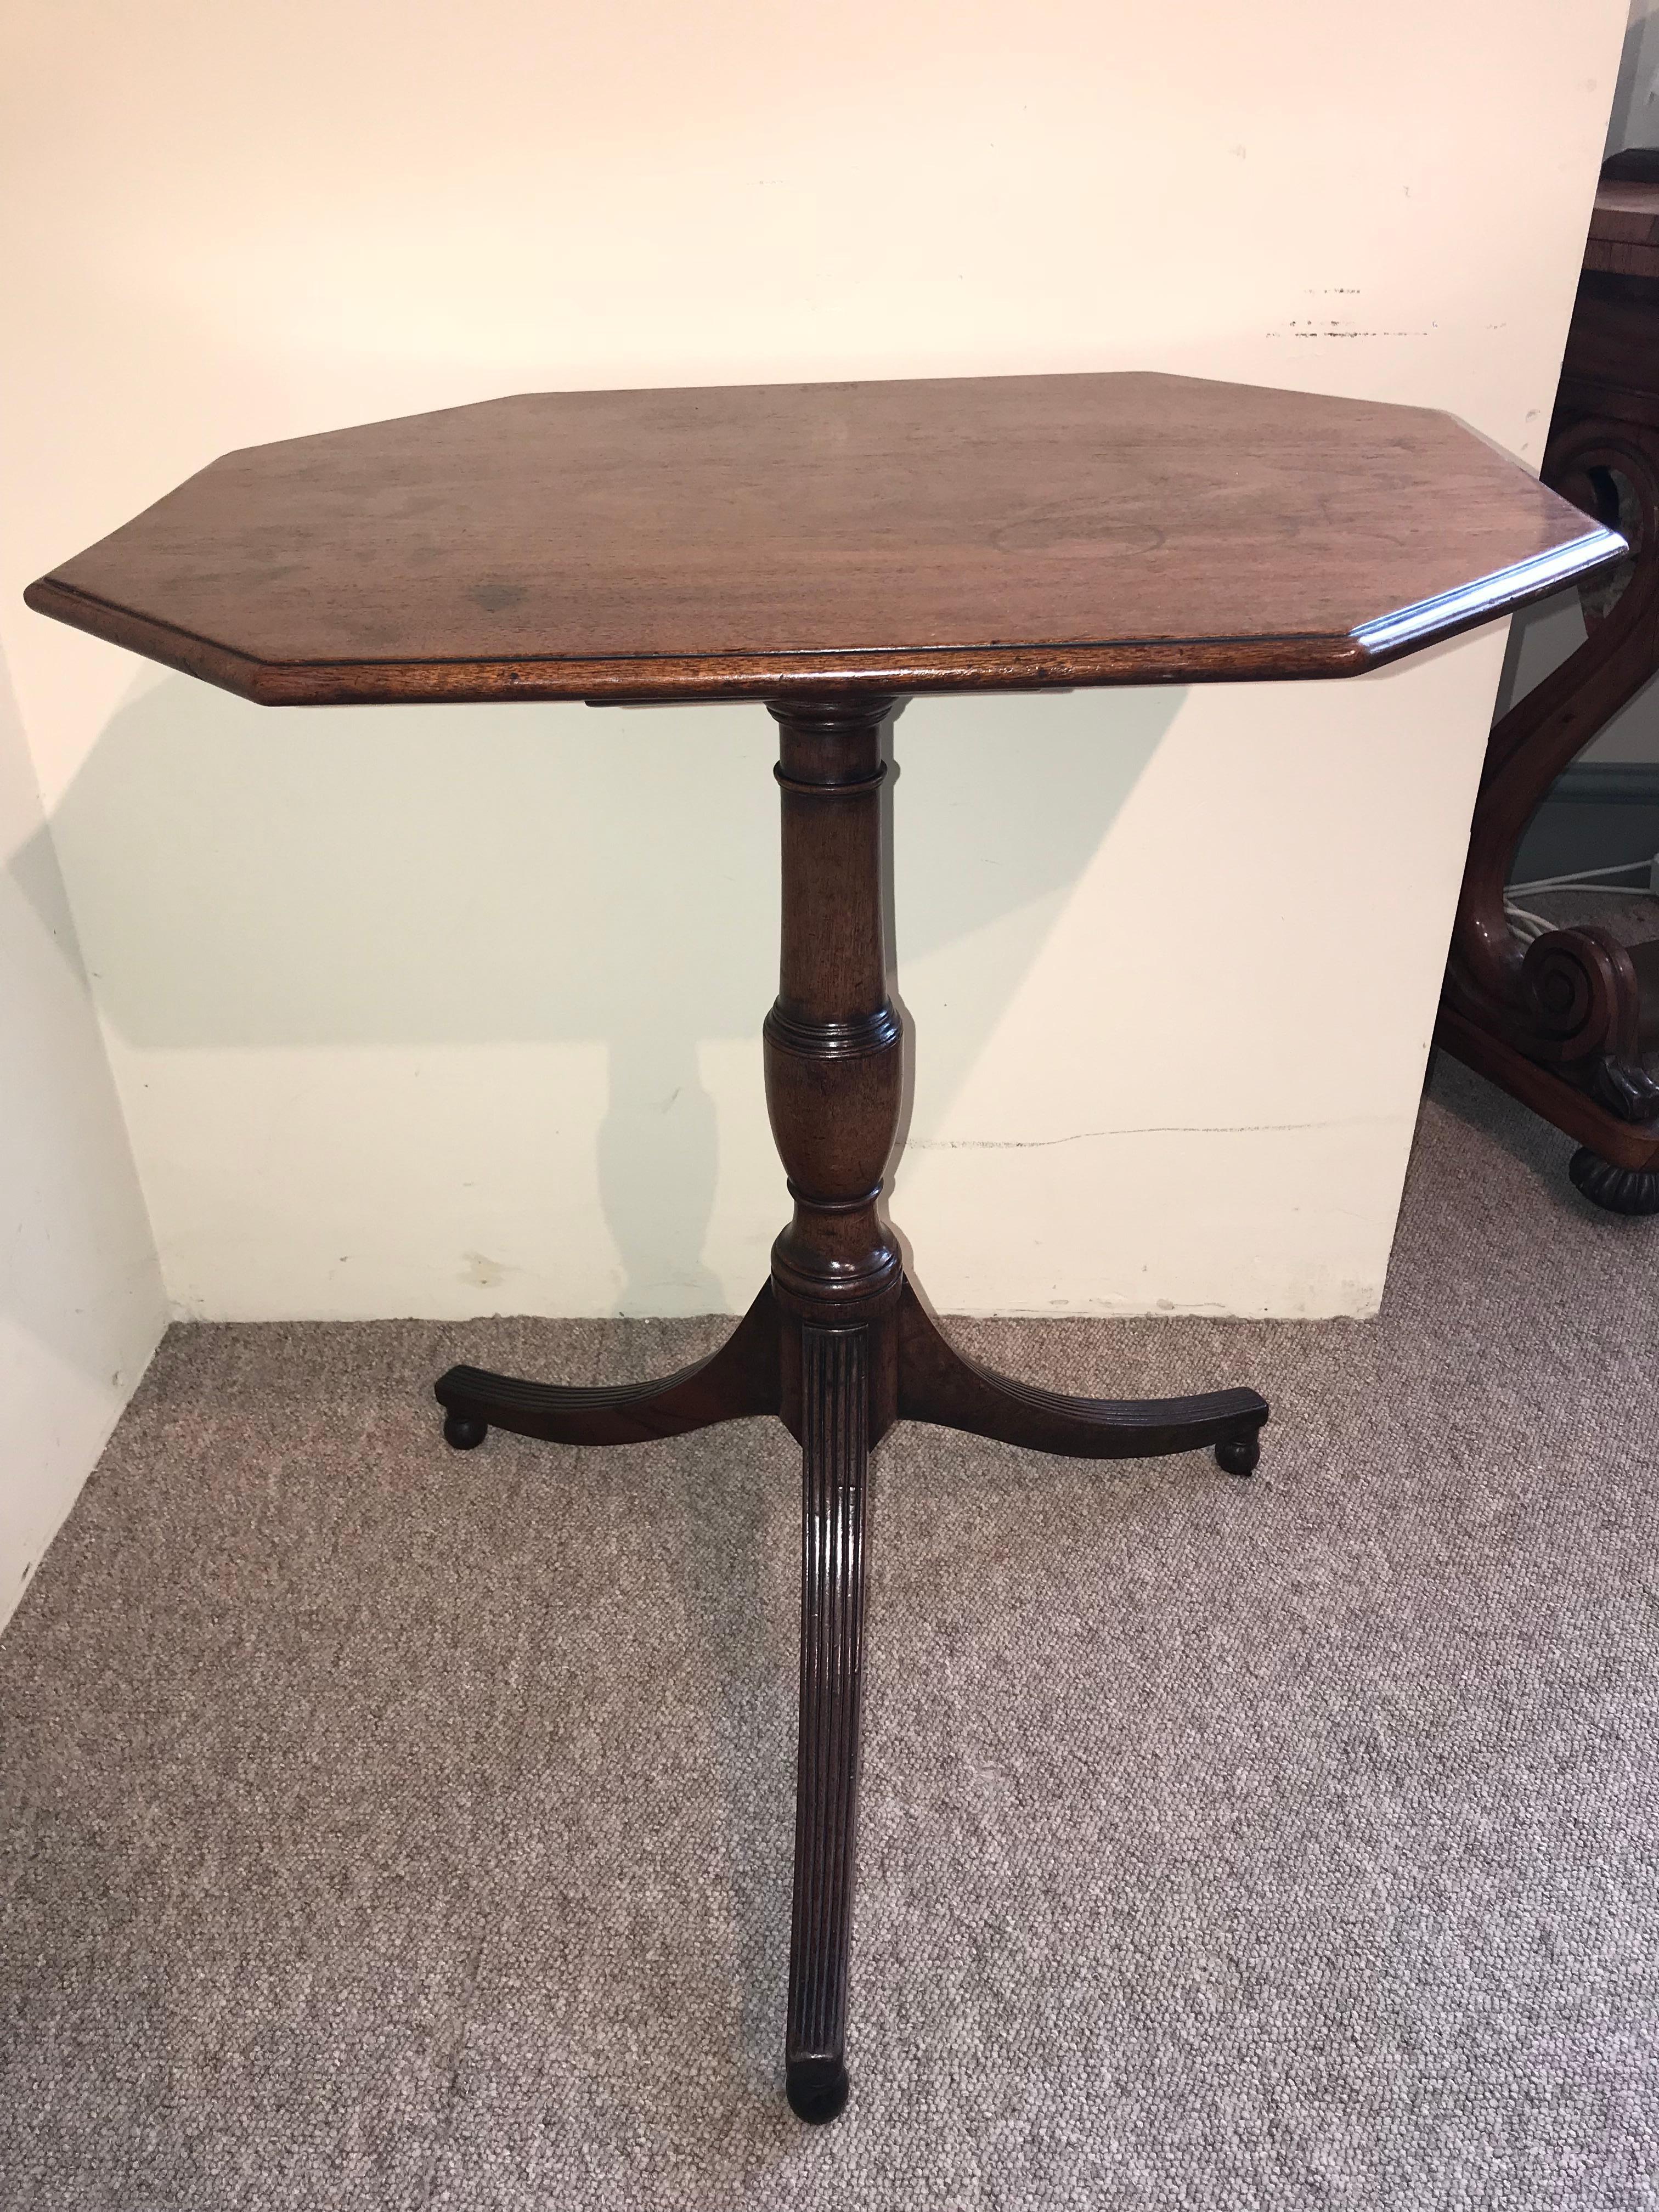 Elegant Regency period octagonal tilt top tripod wine table with a solid mahogany turned stem ending on three out swept and fluted legs.